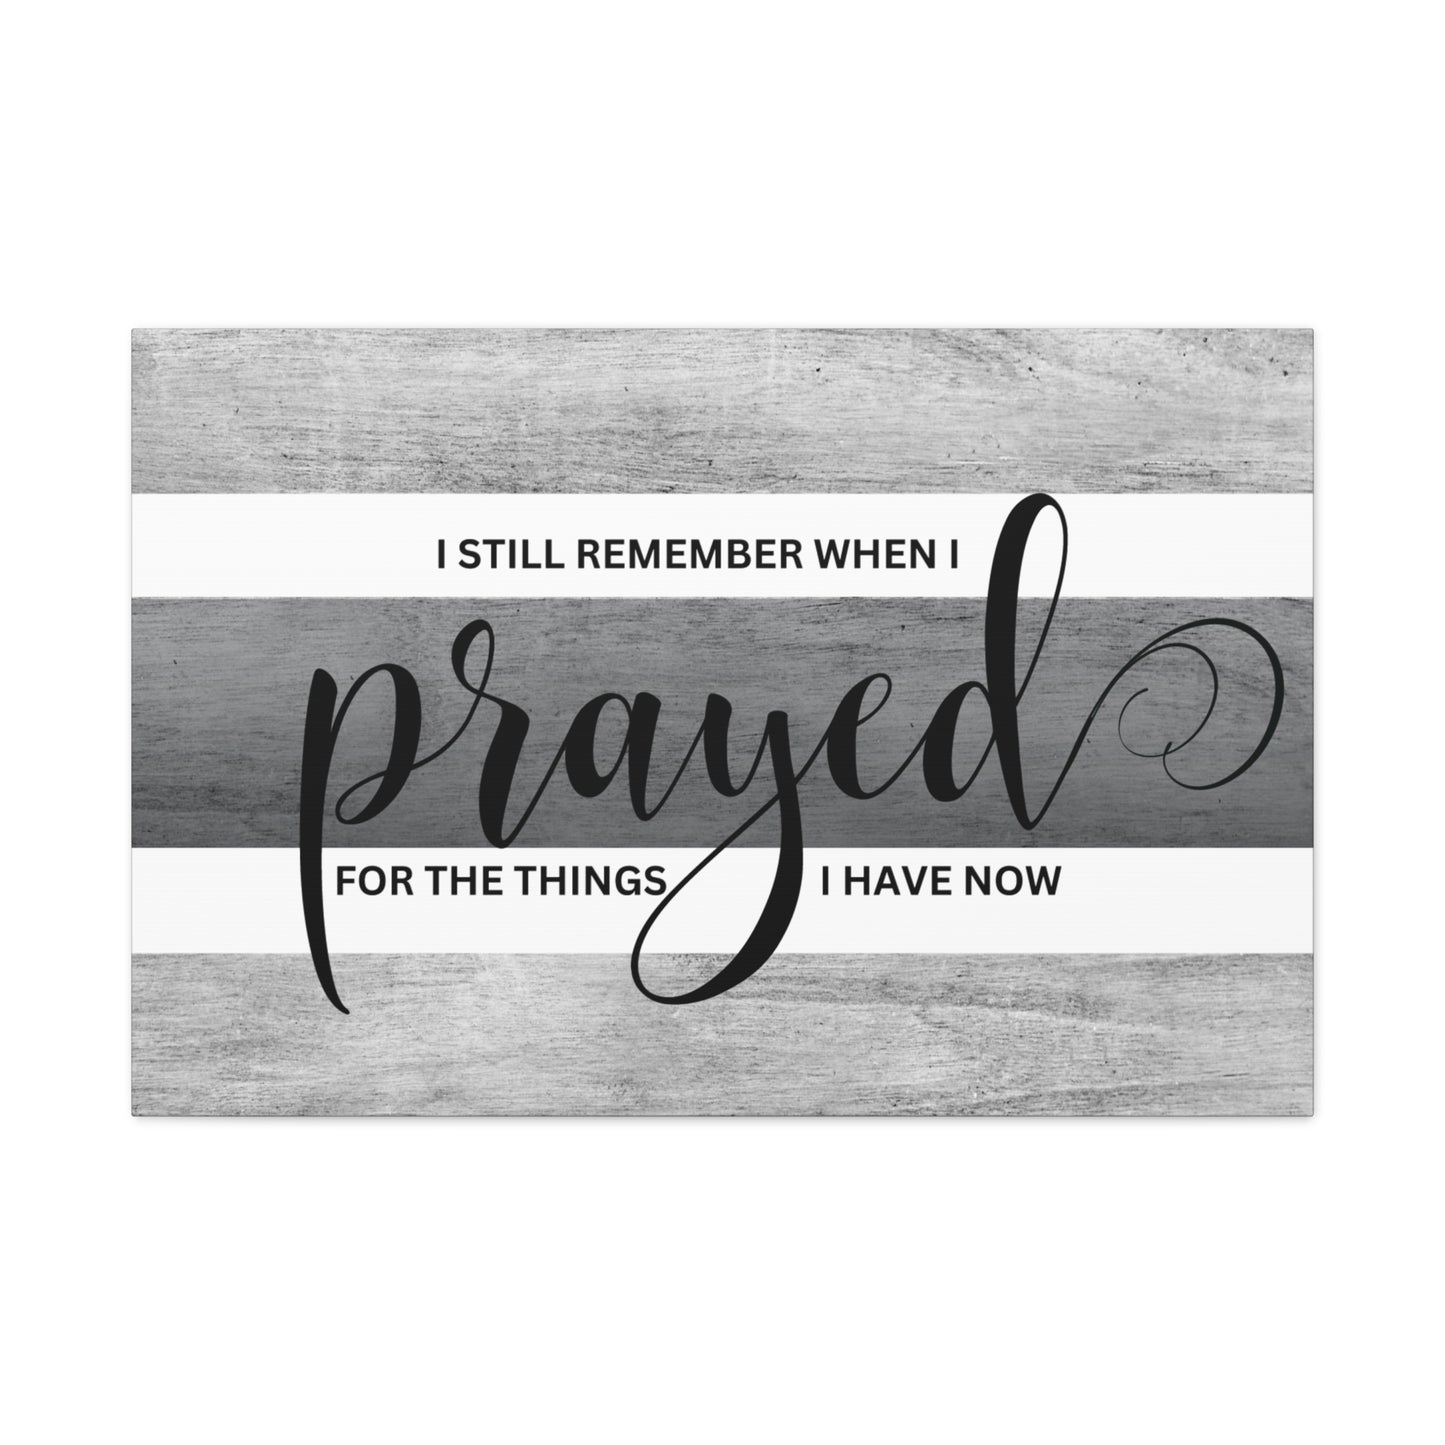 Christian Wall Art: Prayed For (Wood Frame Ready to Hang)